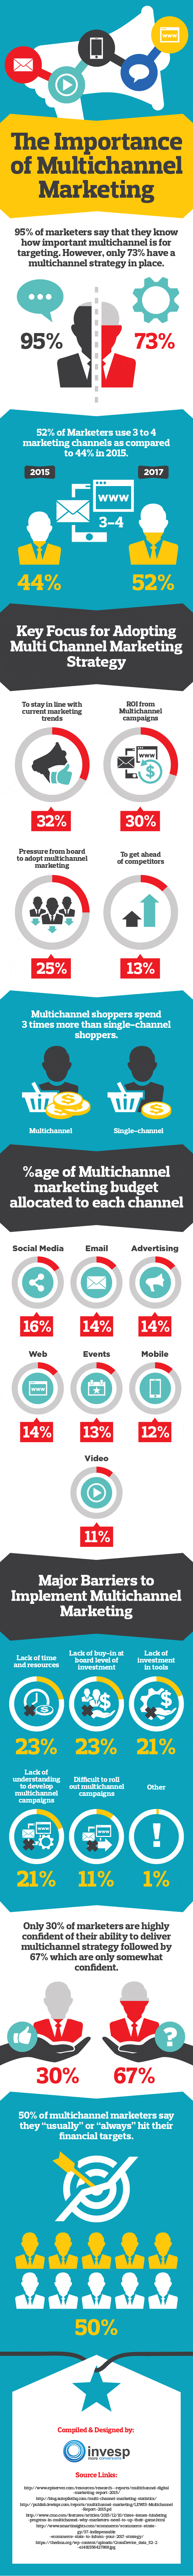 The importance of multichannel marketing